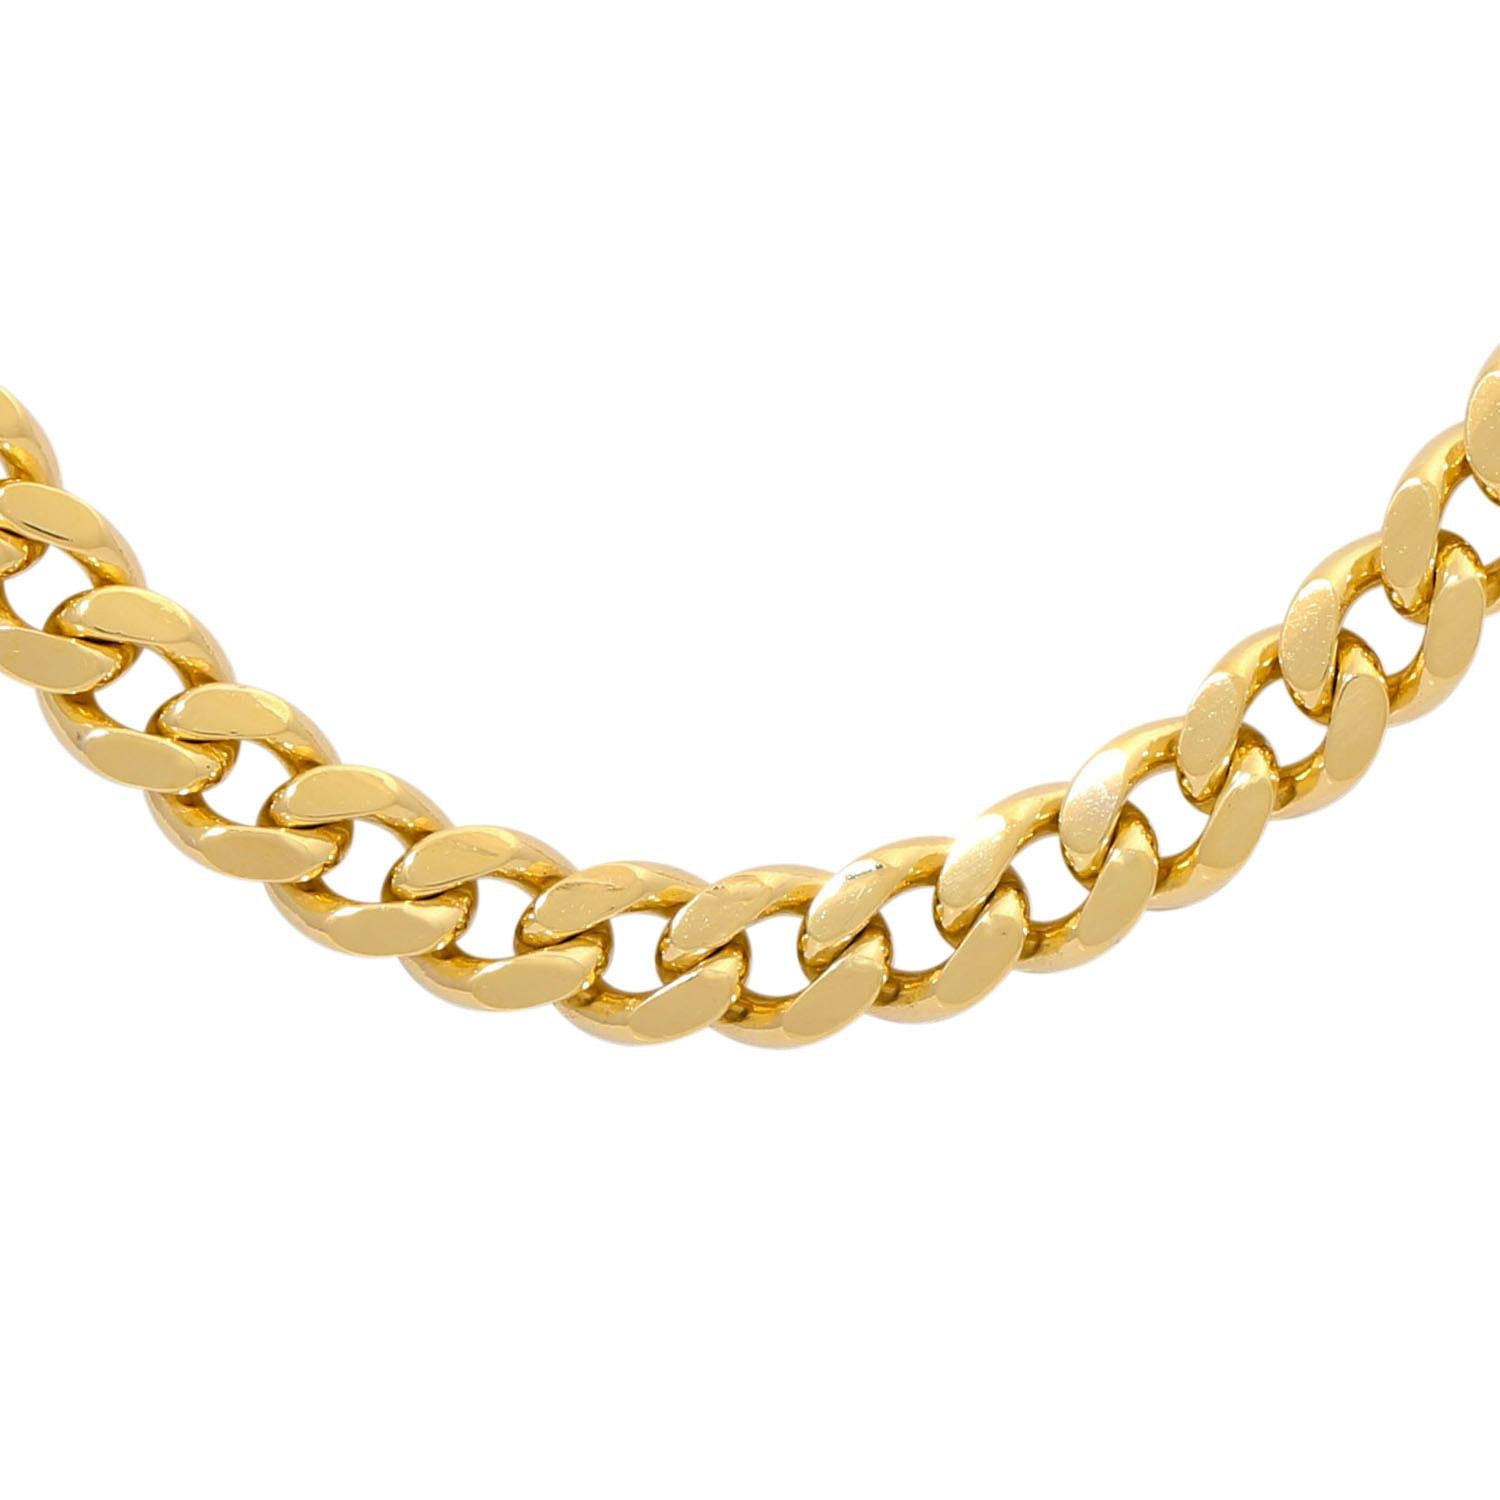 GG 14k, 56.2g, L: 53cm, late 20th century, good condition.

 Necklace, Polished Surface, YG 14K, 56.2G, L: 53cm, late 20th Century, Minor Signs of Wear.